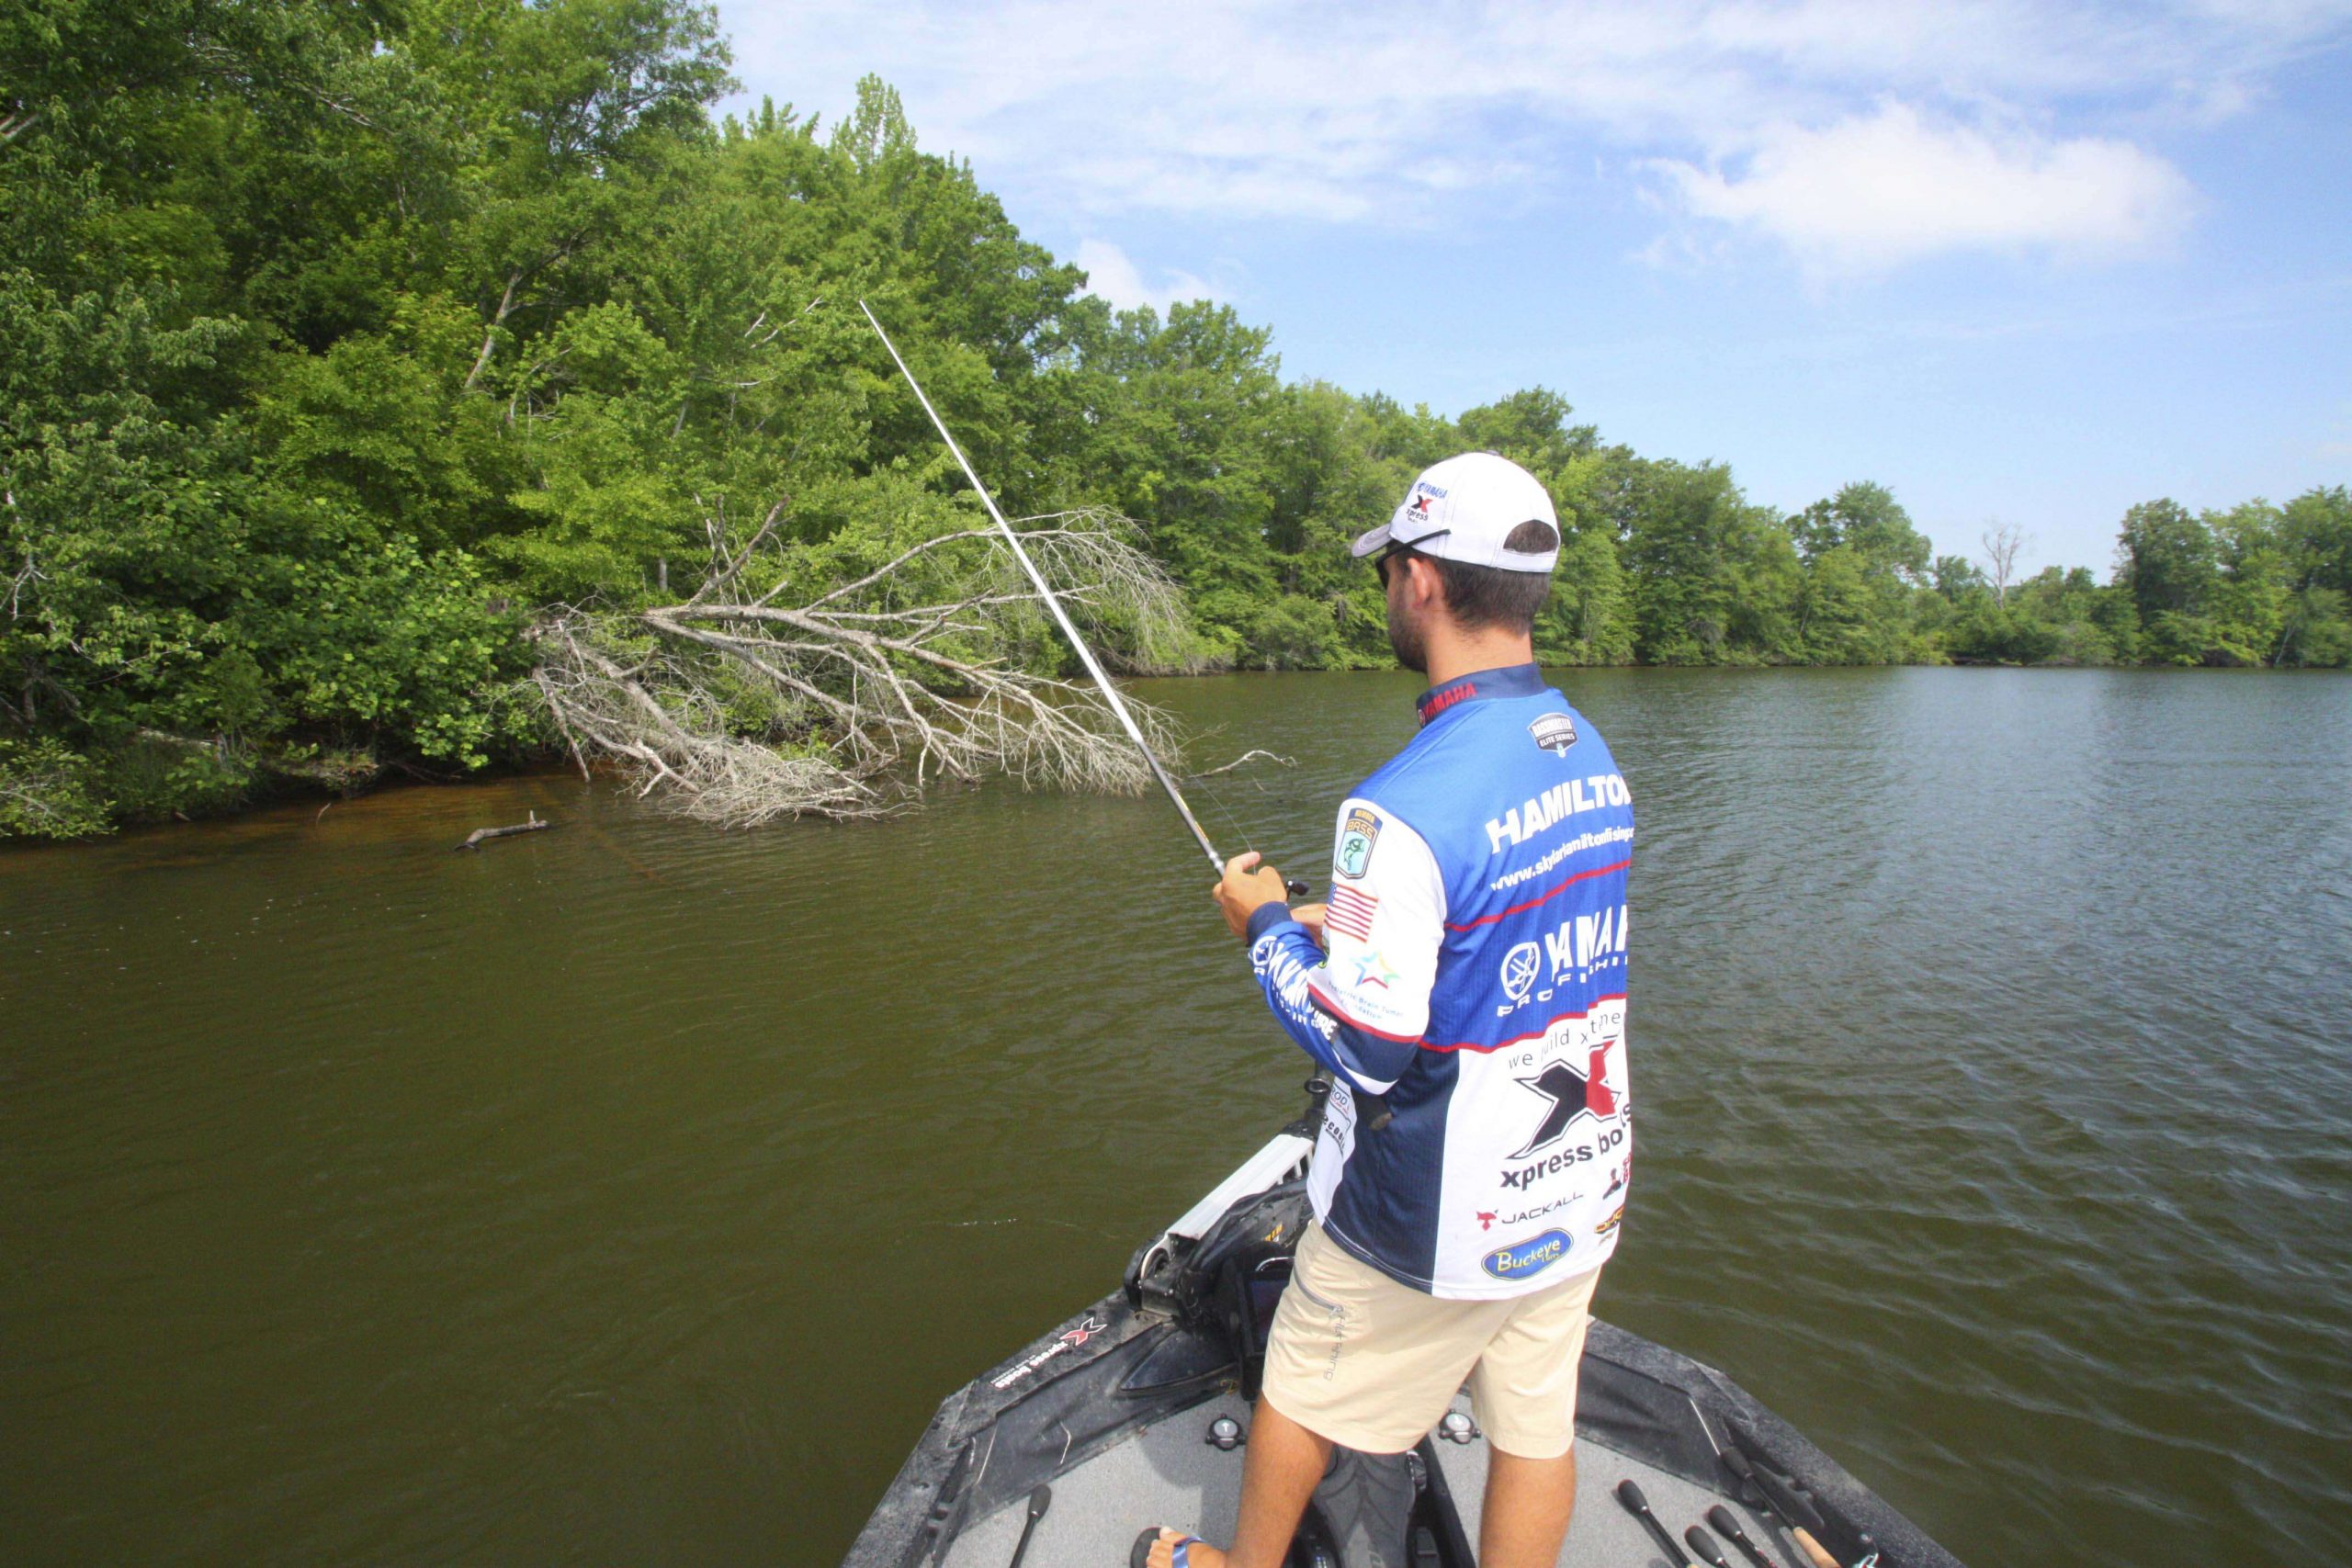 <b>10:38 a.m.</b> Hamilton moves straight across the lake to flip several blowdowns with creatures and jigs. <br>
<b>10:47 a.m.</b> He ties on a black 5/8-ounce Buckeye Mop Jig with a 5-inch green pumpkin Jackall craw trailer. âThis jig has an extremely long skirt; together with that big trailer, it presents a bulky profile in these dense branches.â
